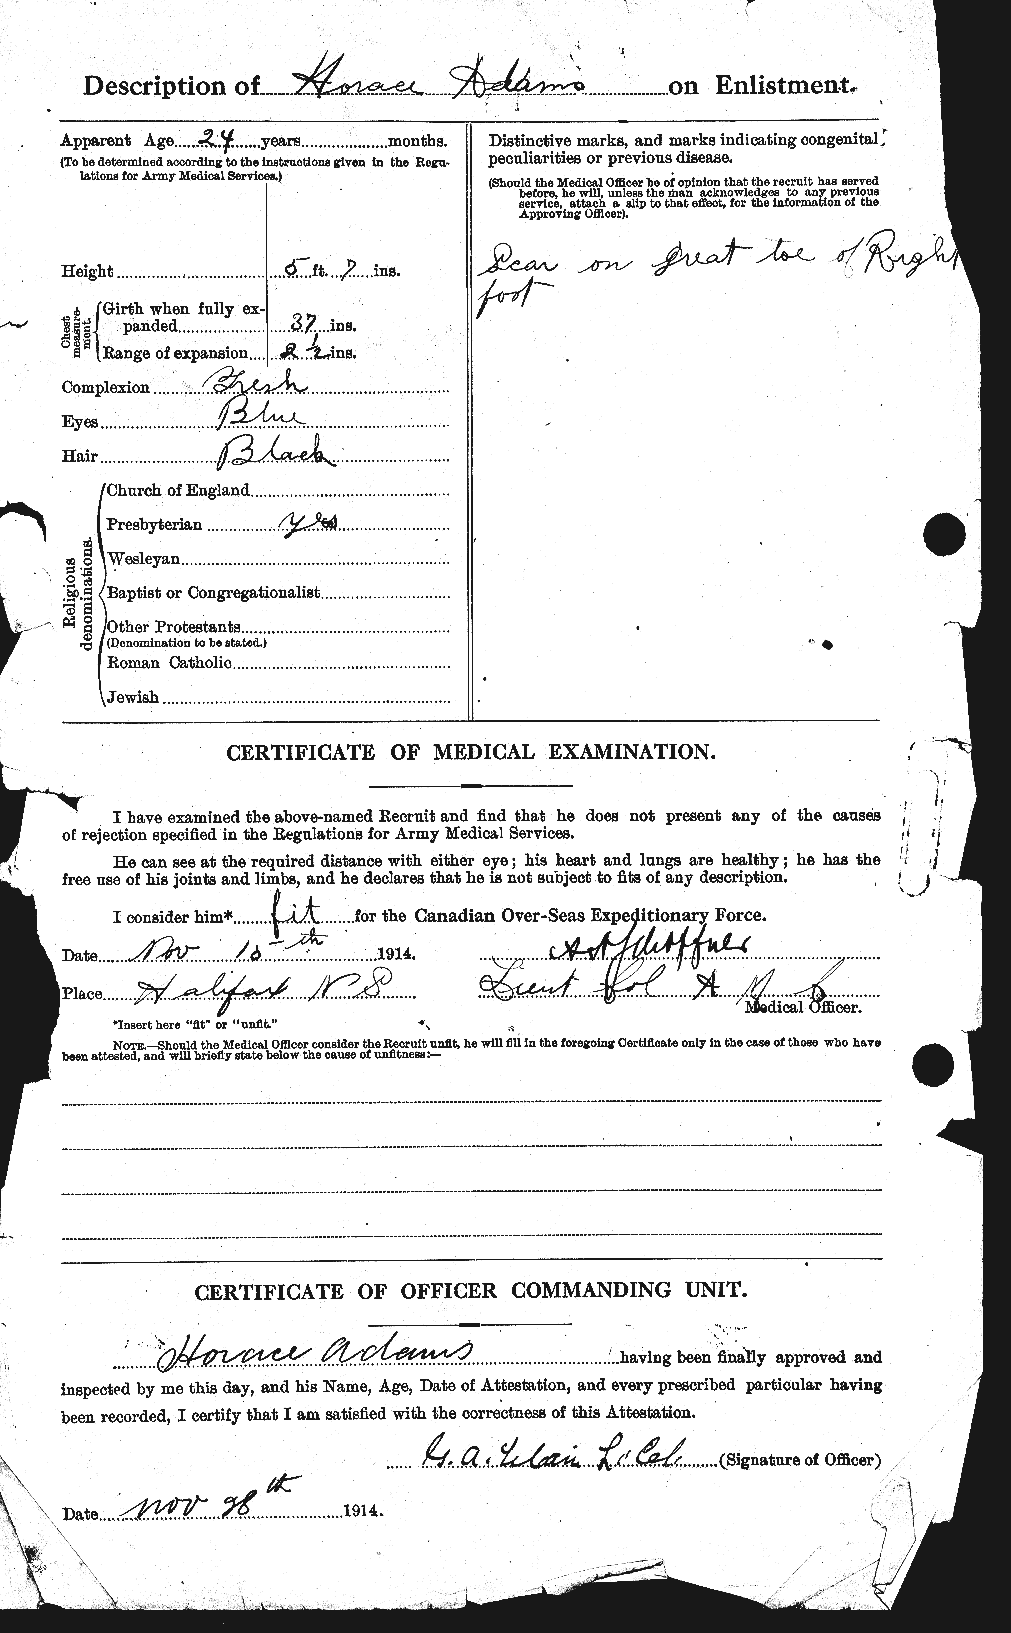 Personnel Records of the First World War - CEF 203204b